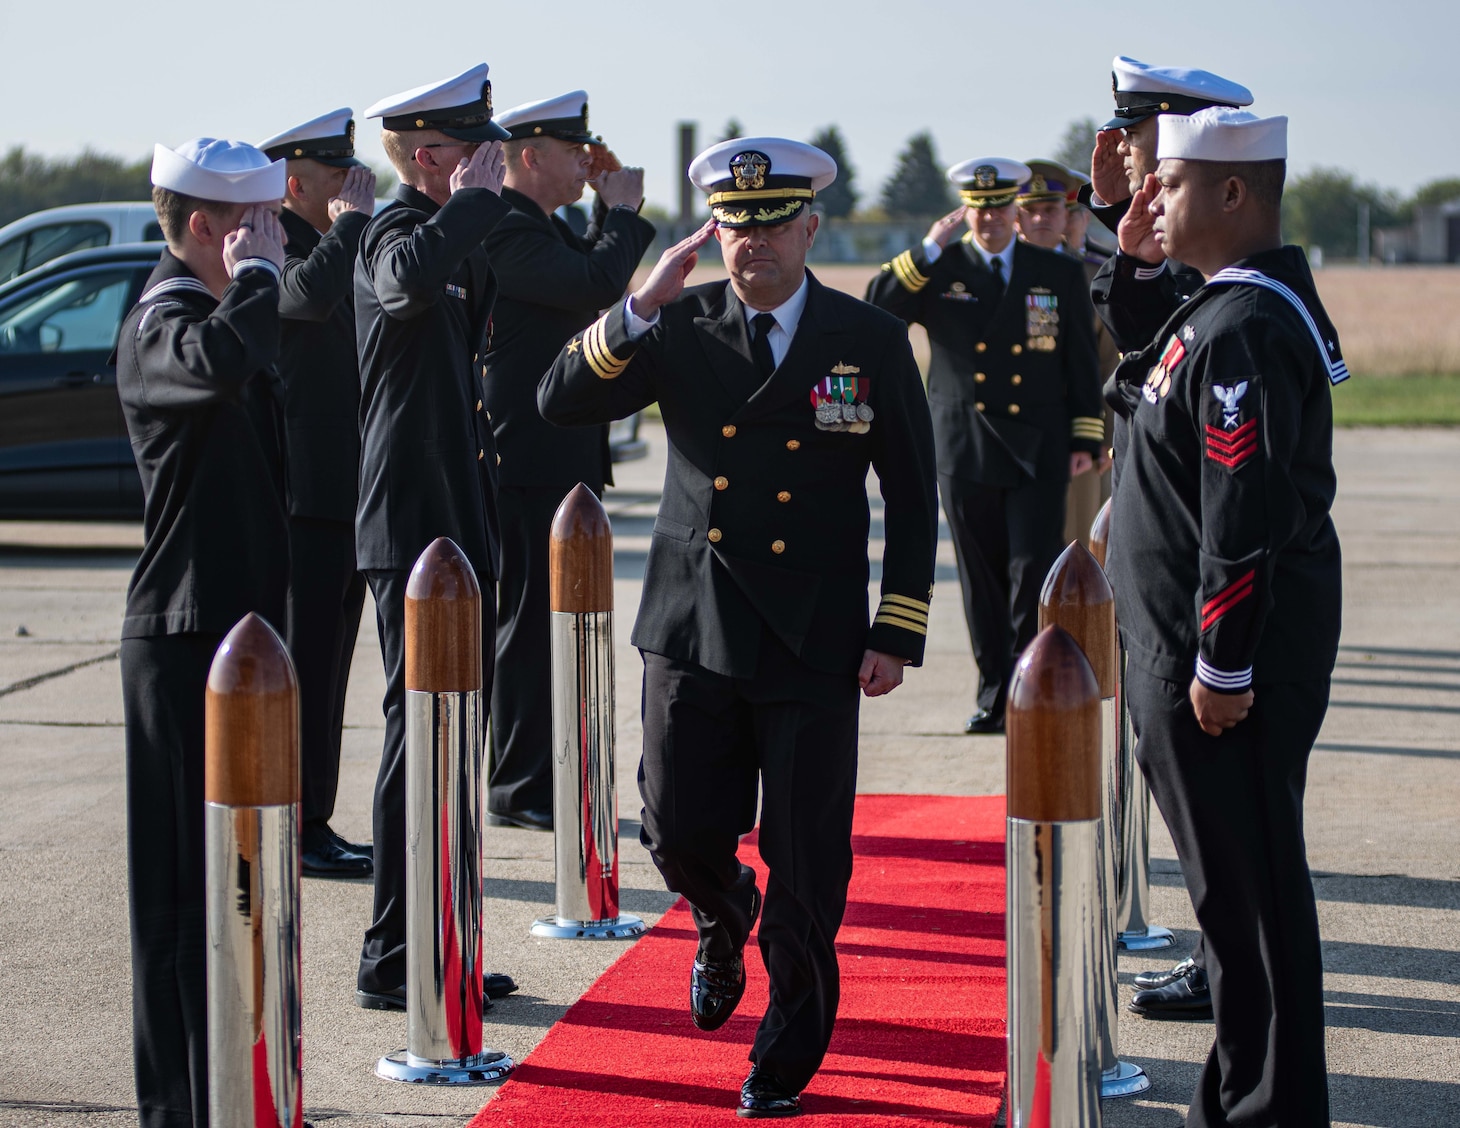 Cmdr. Jonathan P. Schermerhorn renders a hand salute to sideboys during a U.S. Aegis Ashore Missile Defense System Romania (USAAMDSRO) change of command ceremony on Naval Support Facility (NSF) Deveselu, Romania, Oct. 14, 2022.